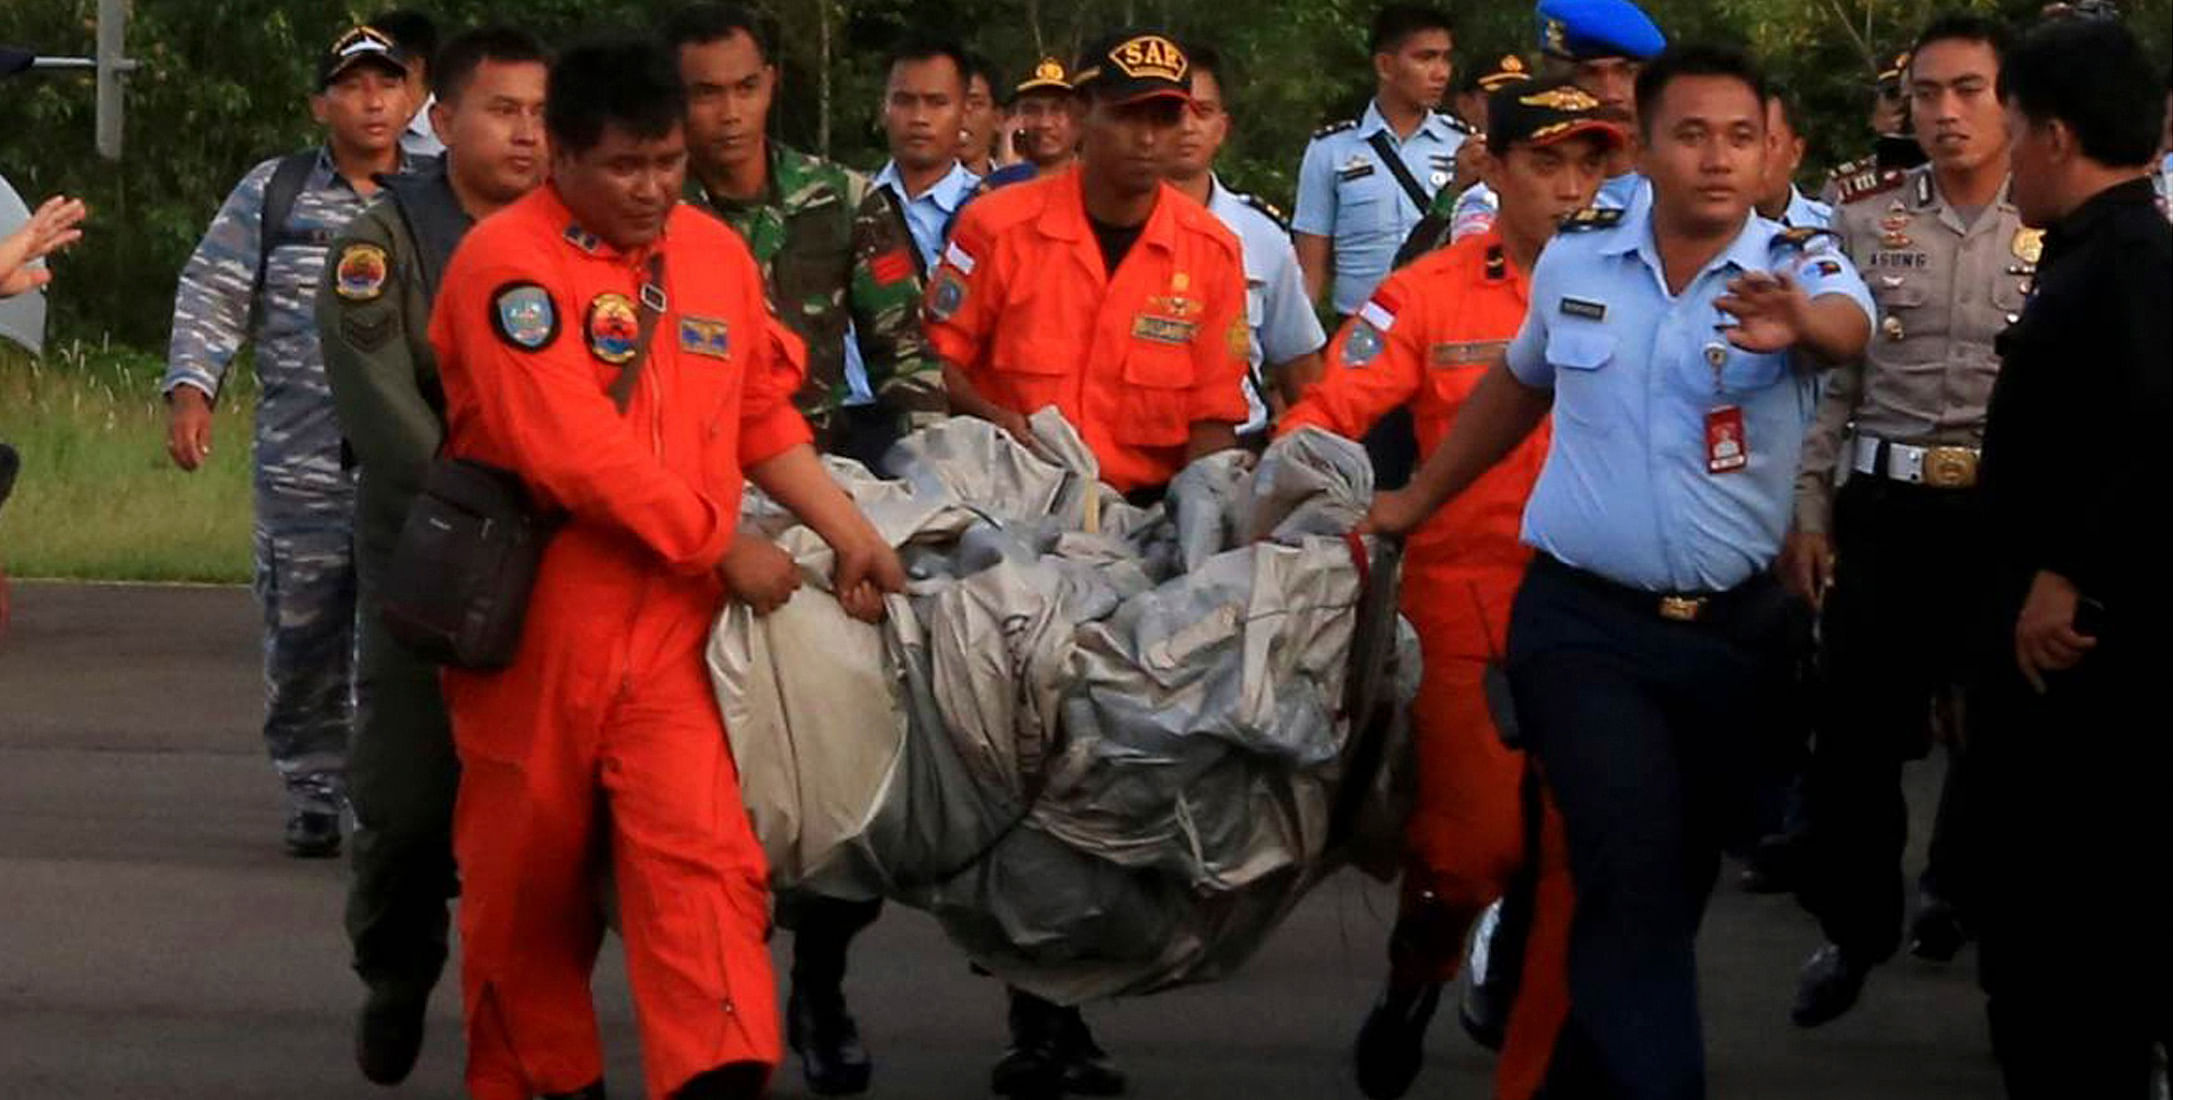 Members of the Search and Rescue Agency SARS carry debris recovered from the sea presumed from missing Indonesia AirAsia flight QZ 8501 at Pangkalan Bun, Central Kalimantan, December 30, 2014 in this photo taken by Antara Foto. The photo is taken from Reuters.